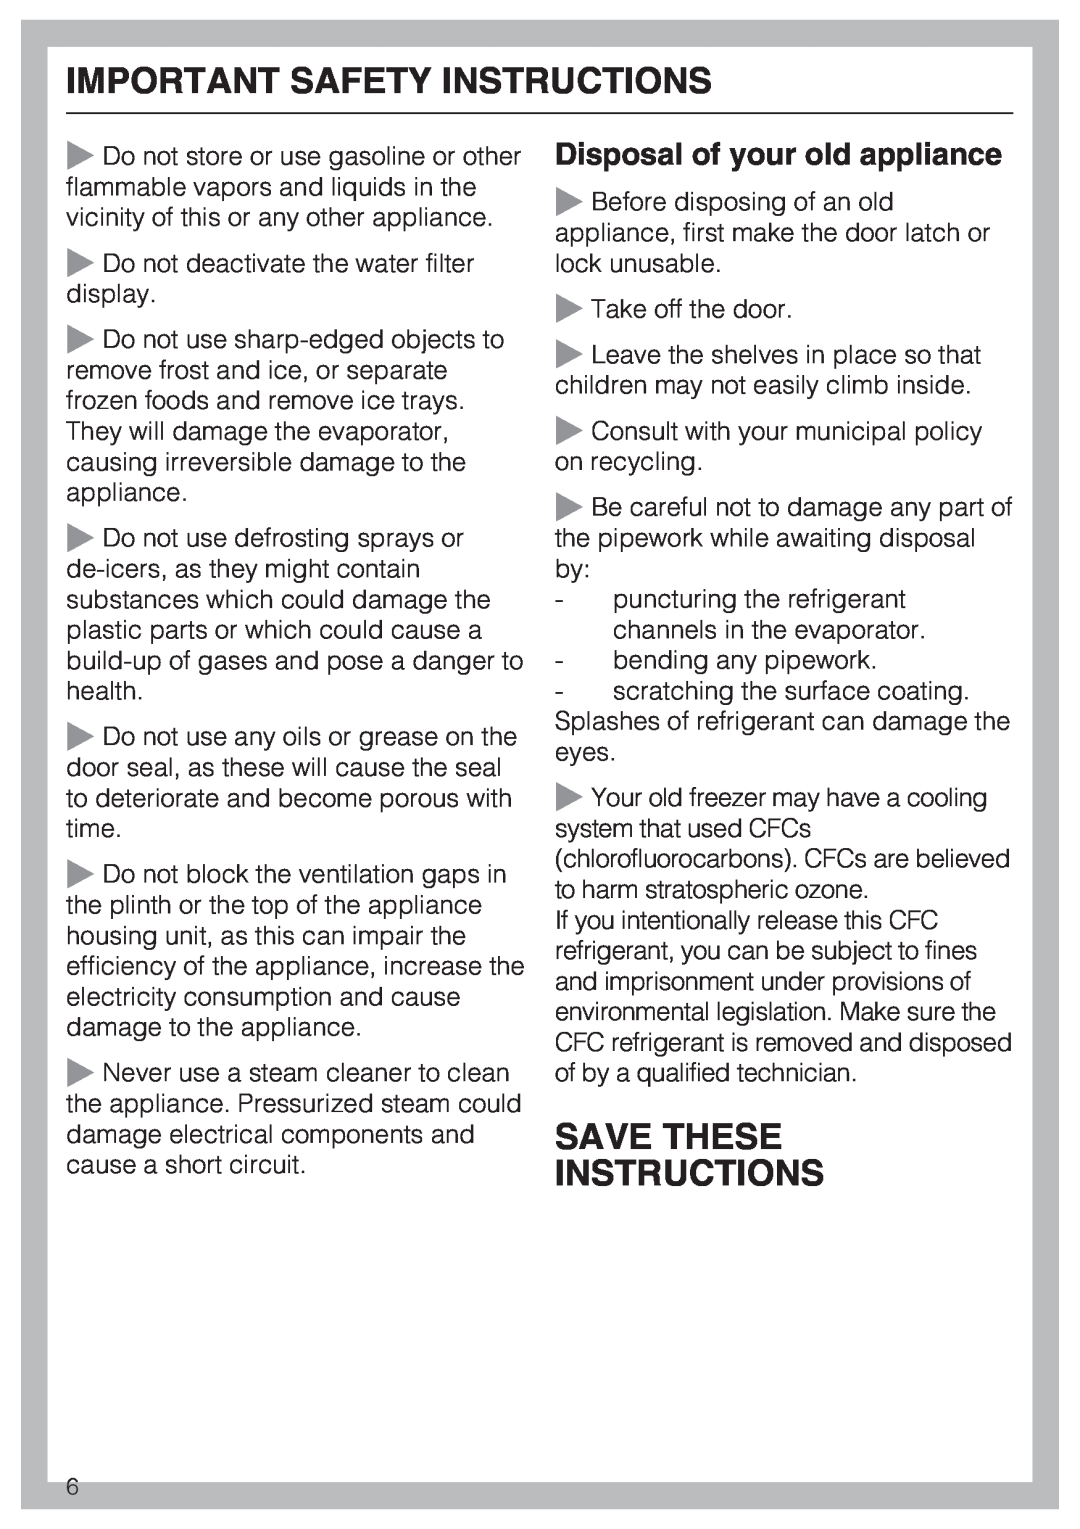 Miele F1411VI Save These Instructions, Disposal of your old appliance, Important Safety Instructions 